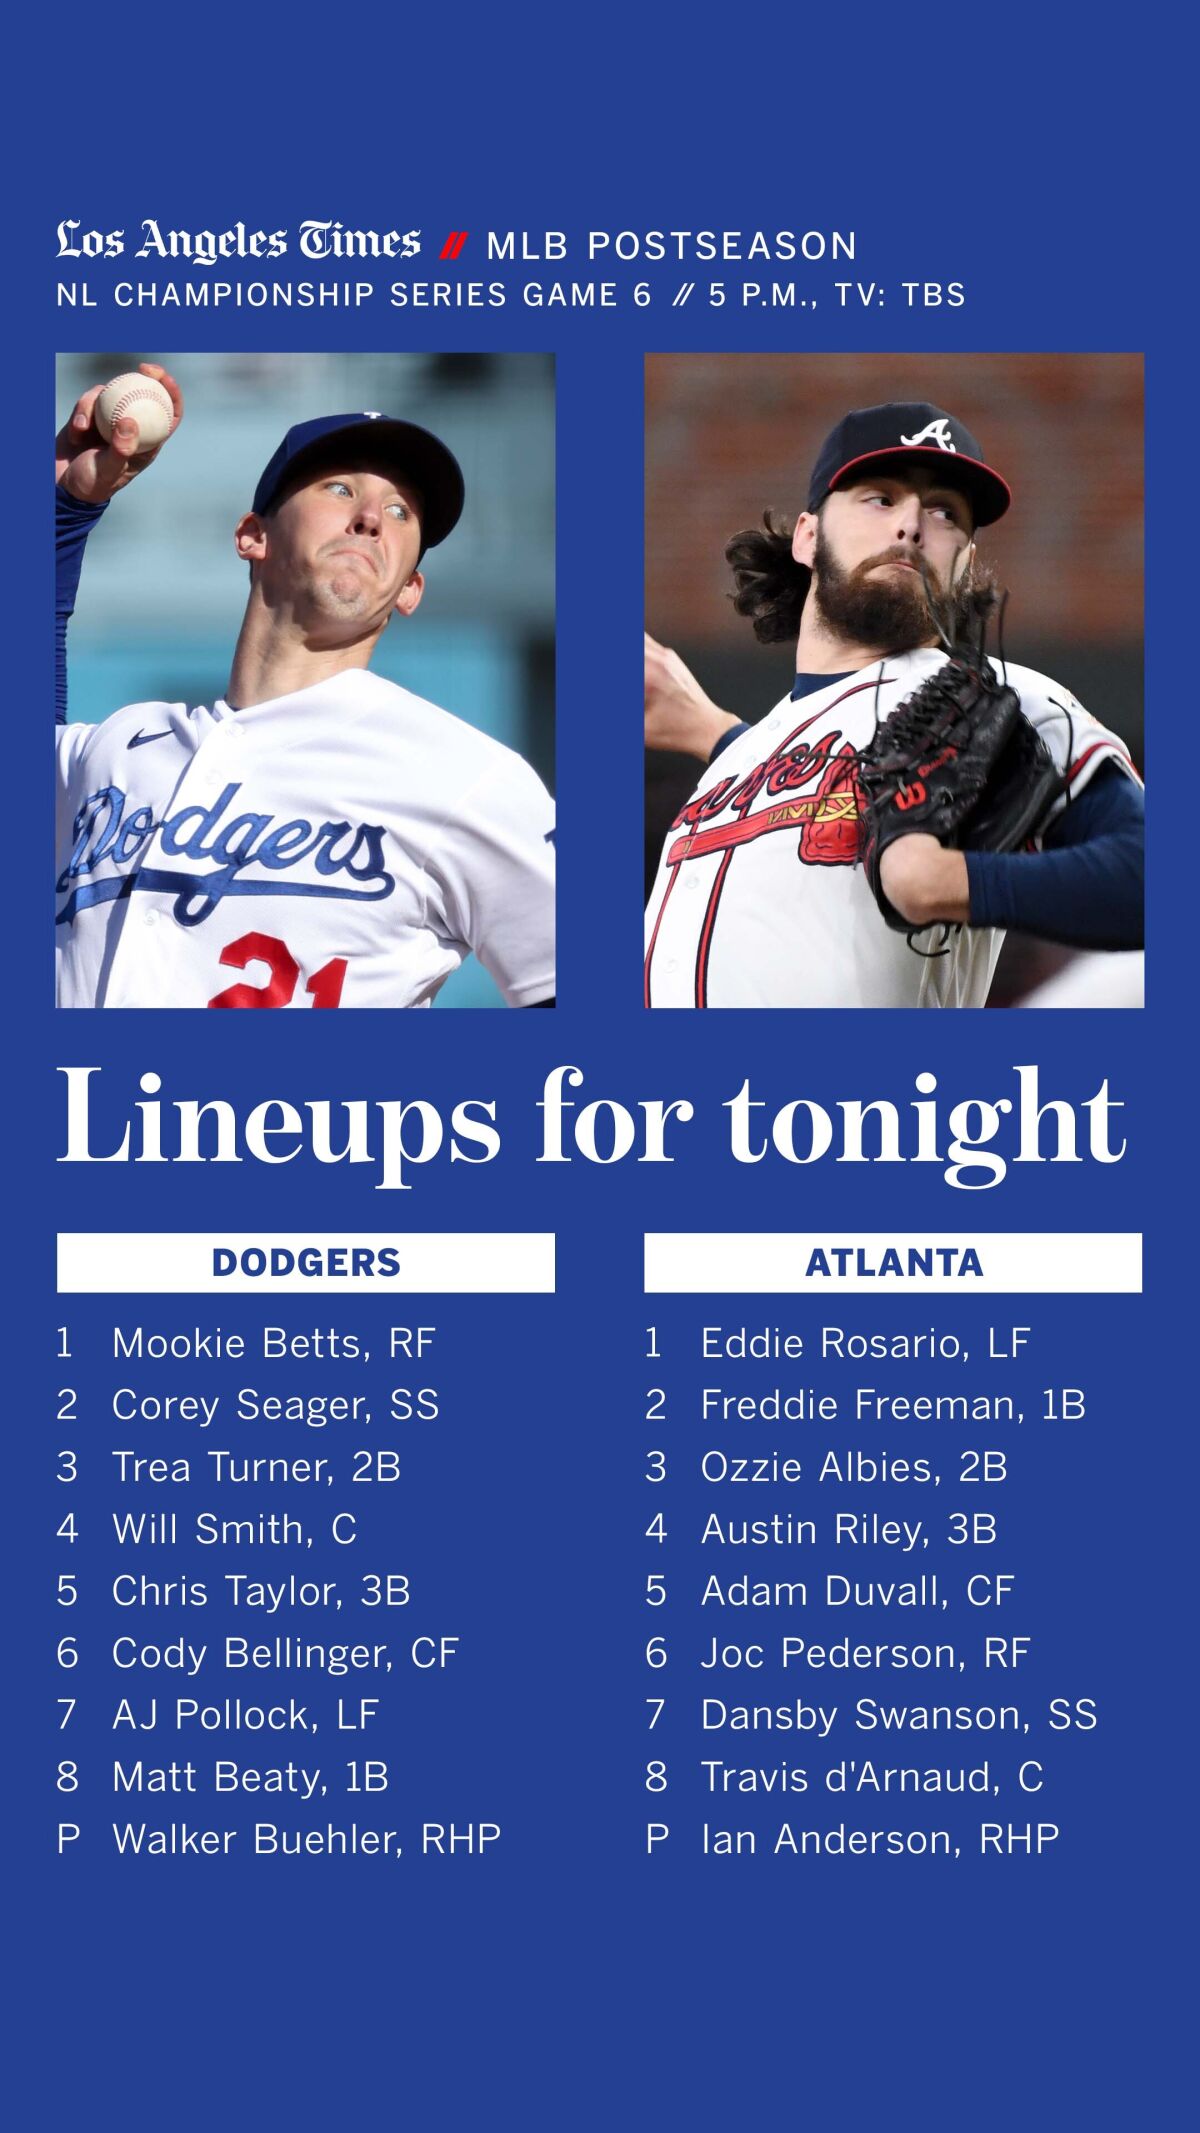 Dodgers and Braves lineups for Game 6 of the 2021 NLCS.